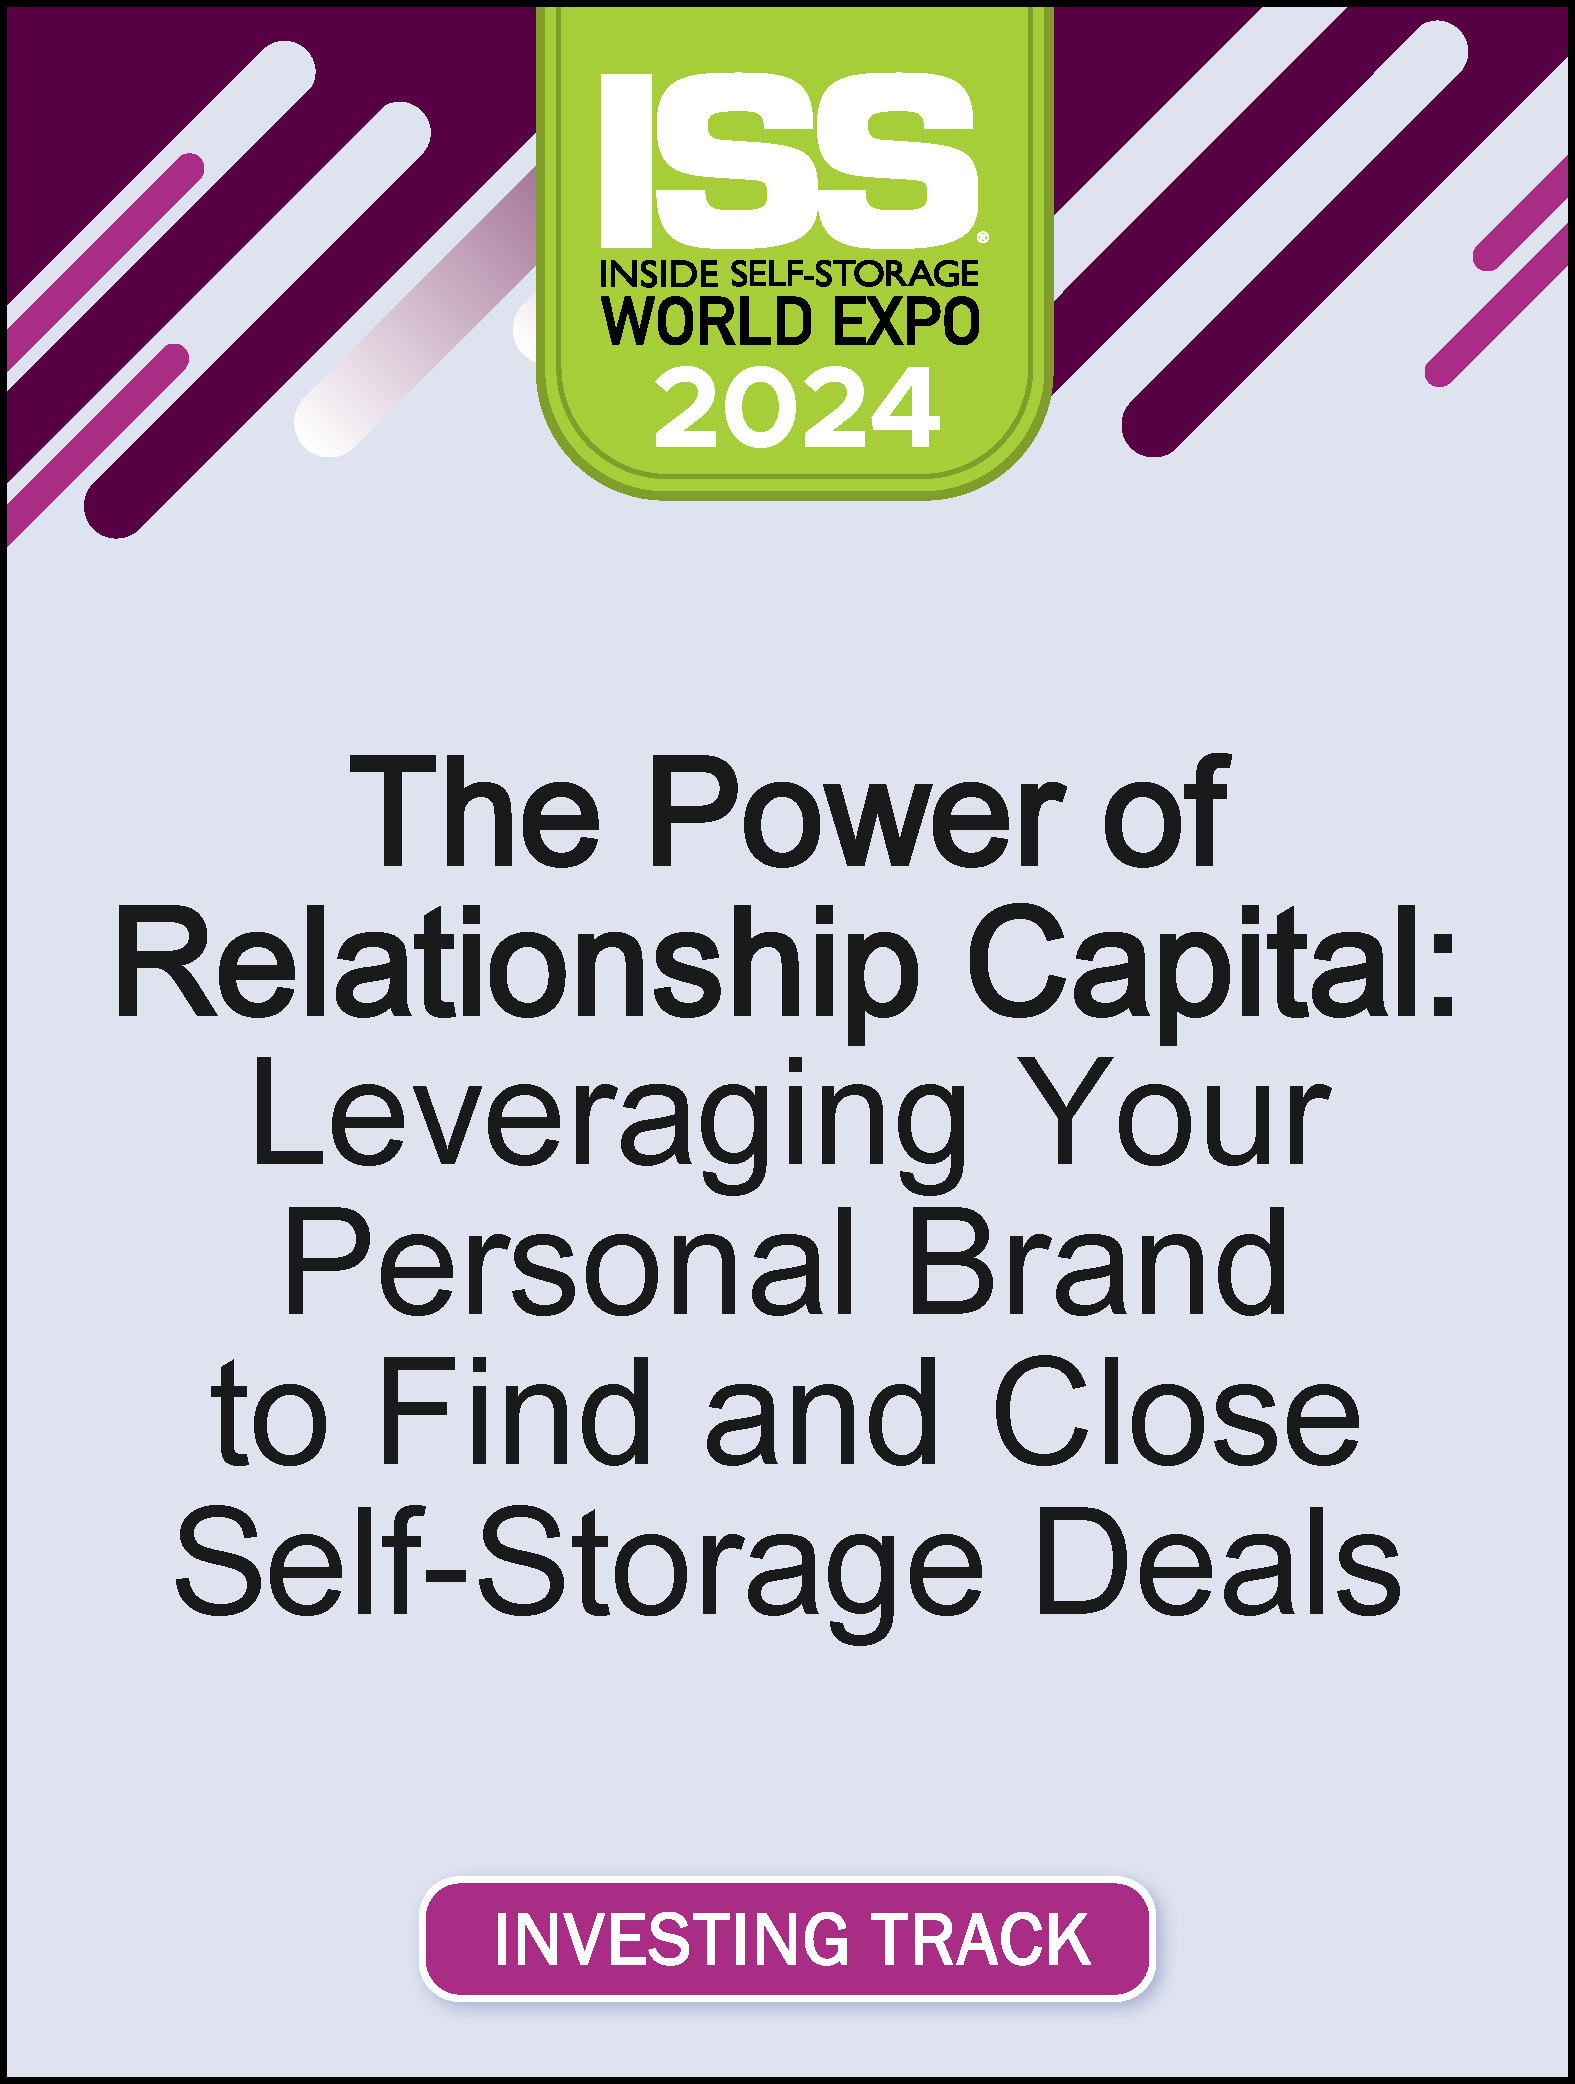 Video Pre-Order - The Power of Relationship Capital: Leveraging Your Personal Brand to Find and Close Self-Storage Deals